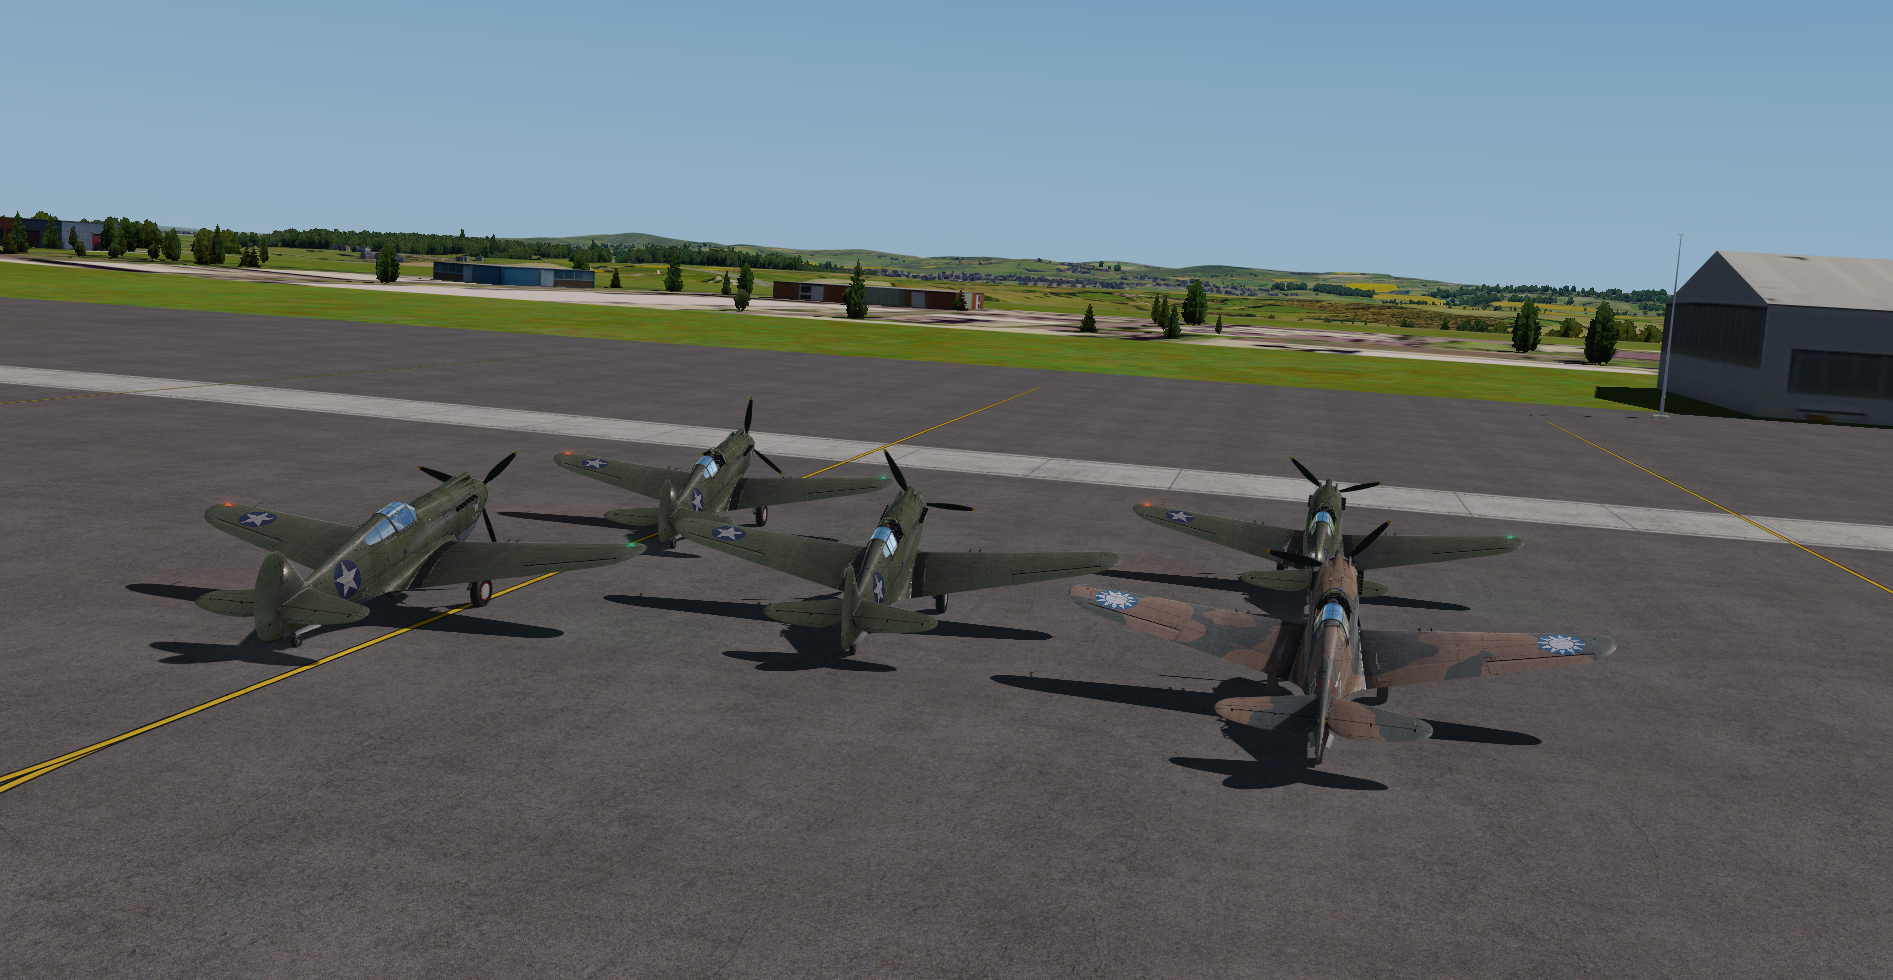 Leader Joe pulled together a P40 flight today.  Here we have just landed.